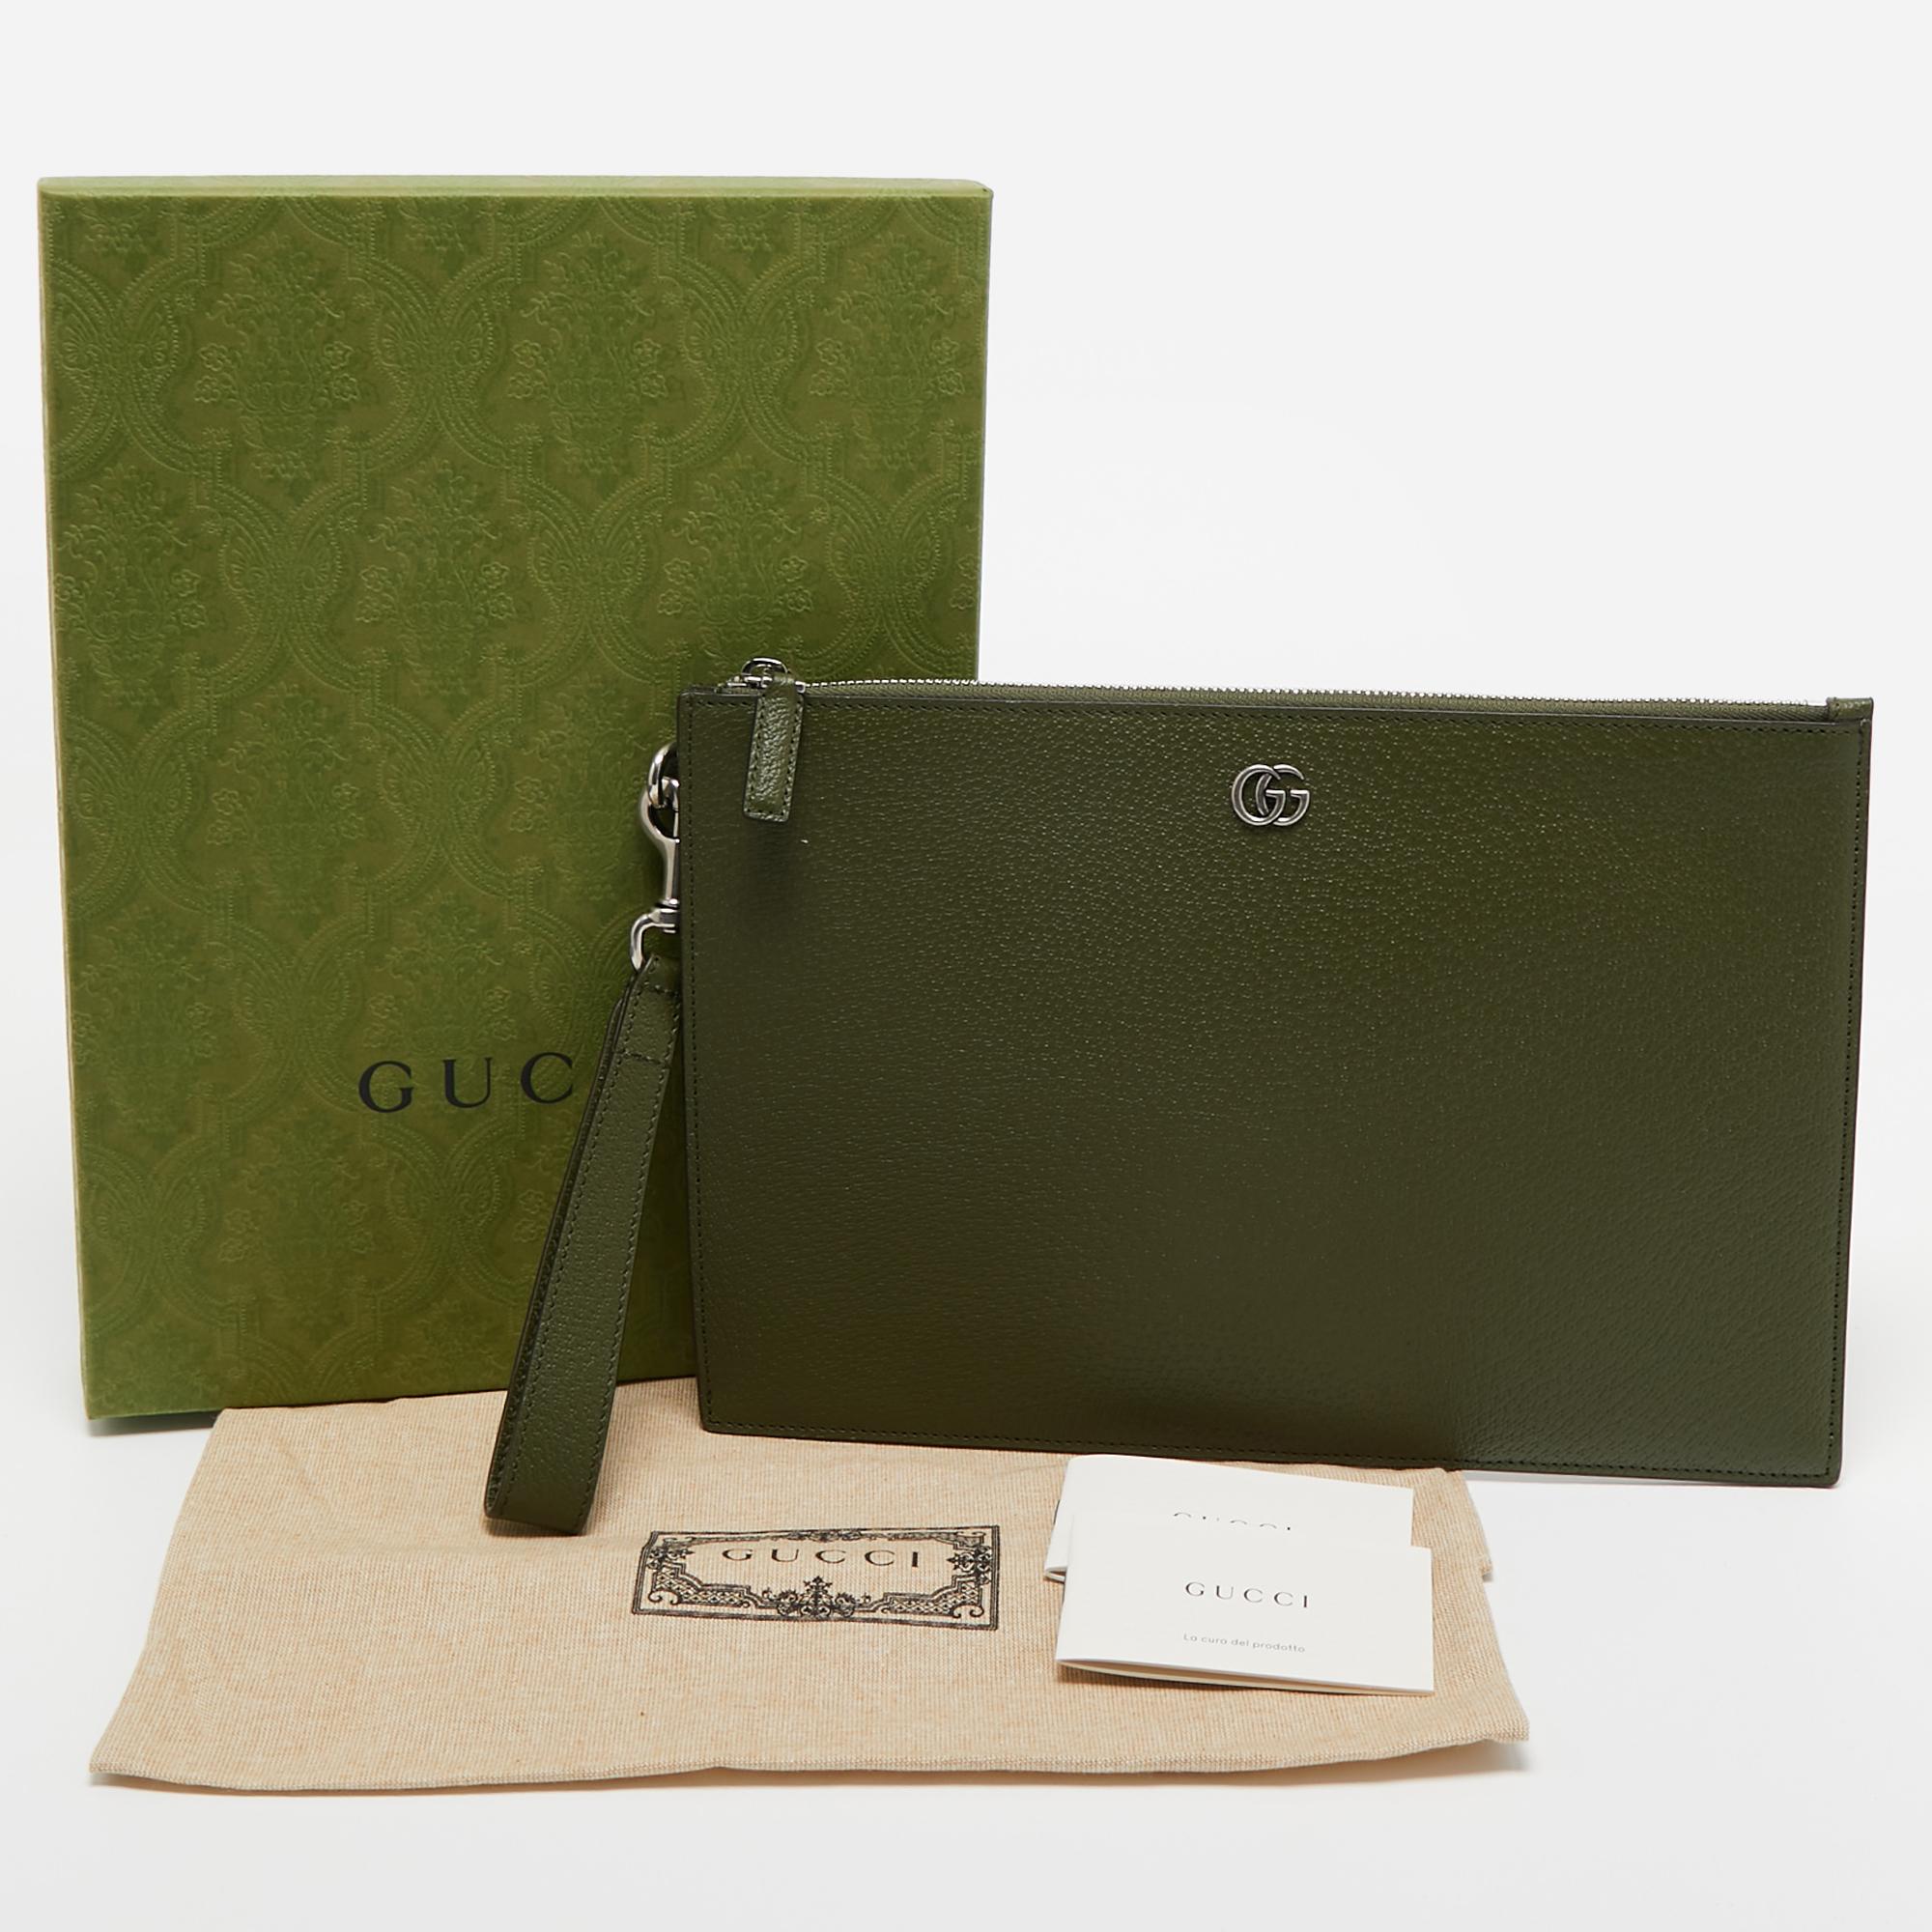 Gucci Fatigue Green Leather GG Marmont Pouch 8